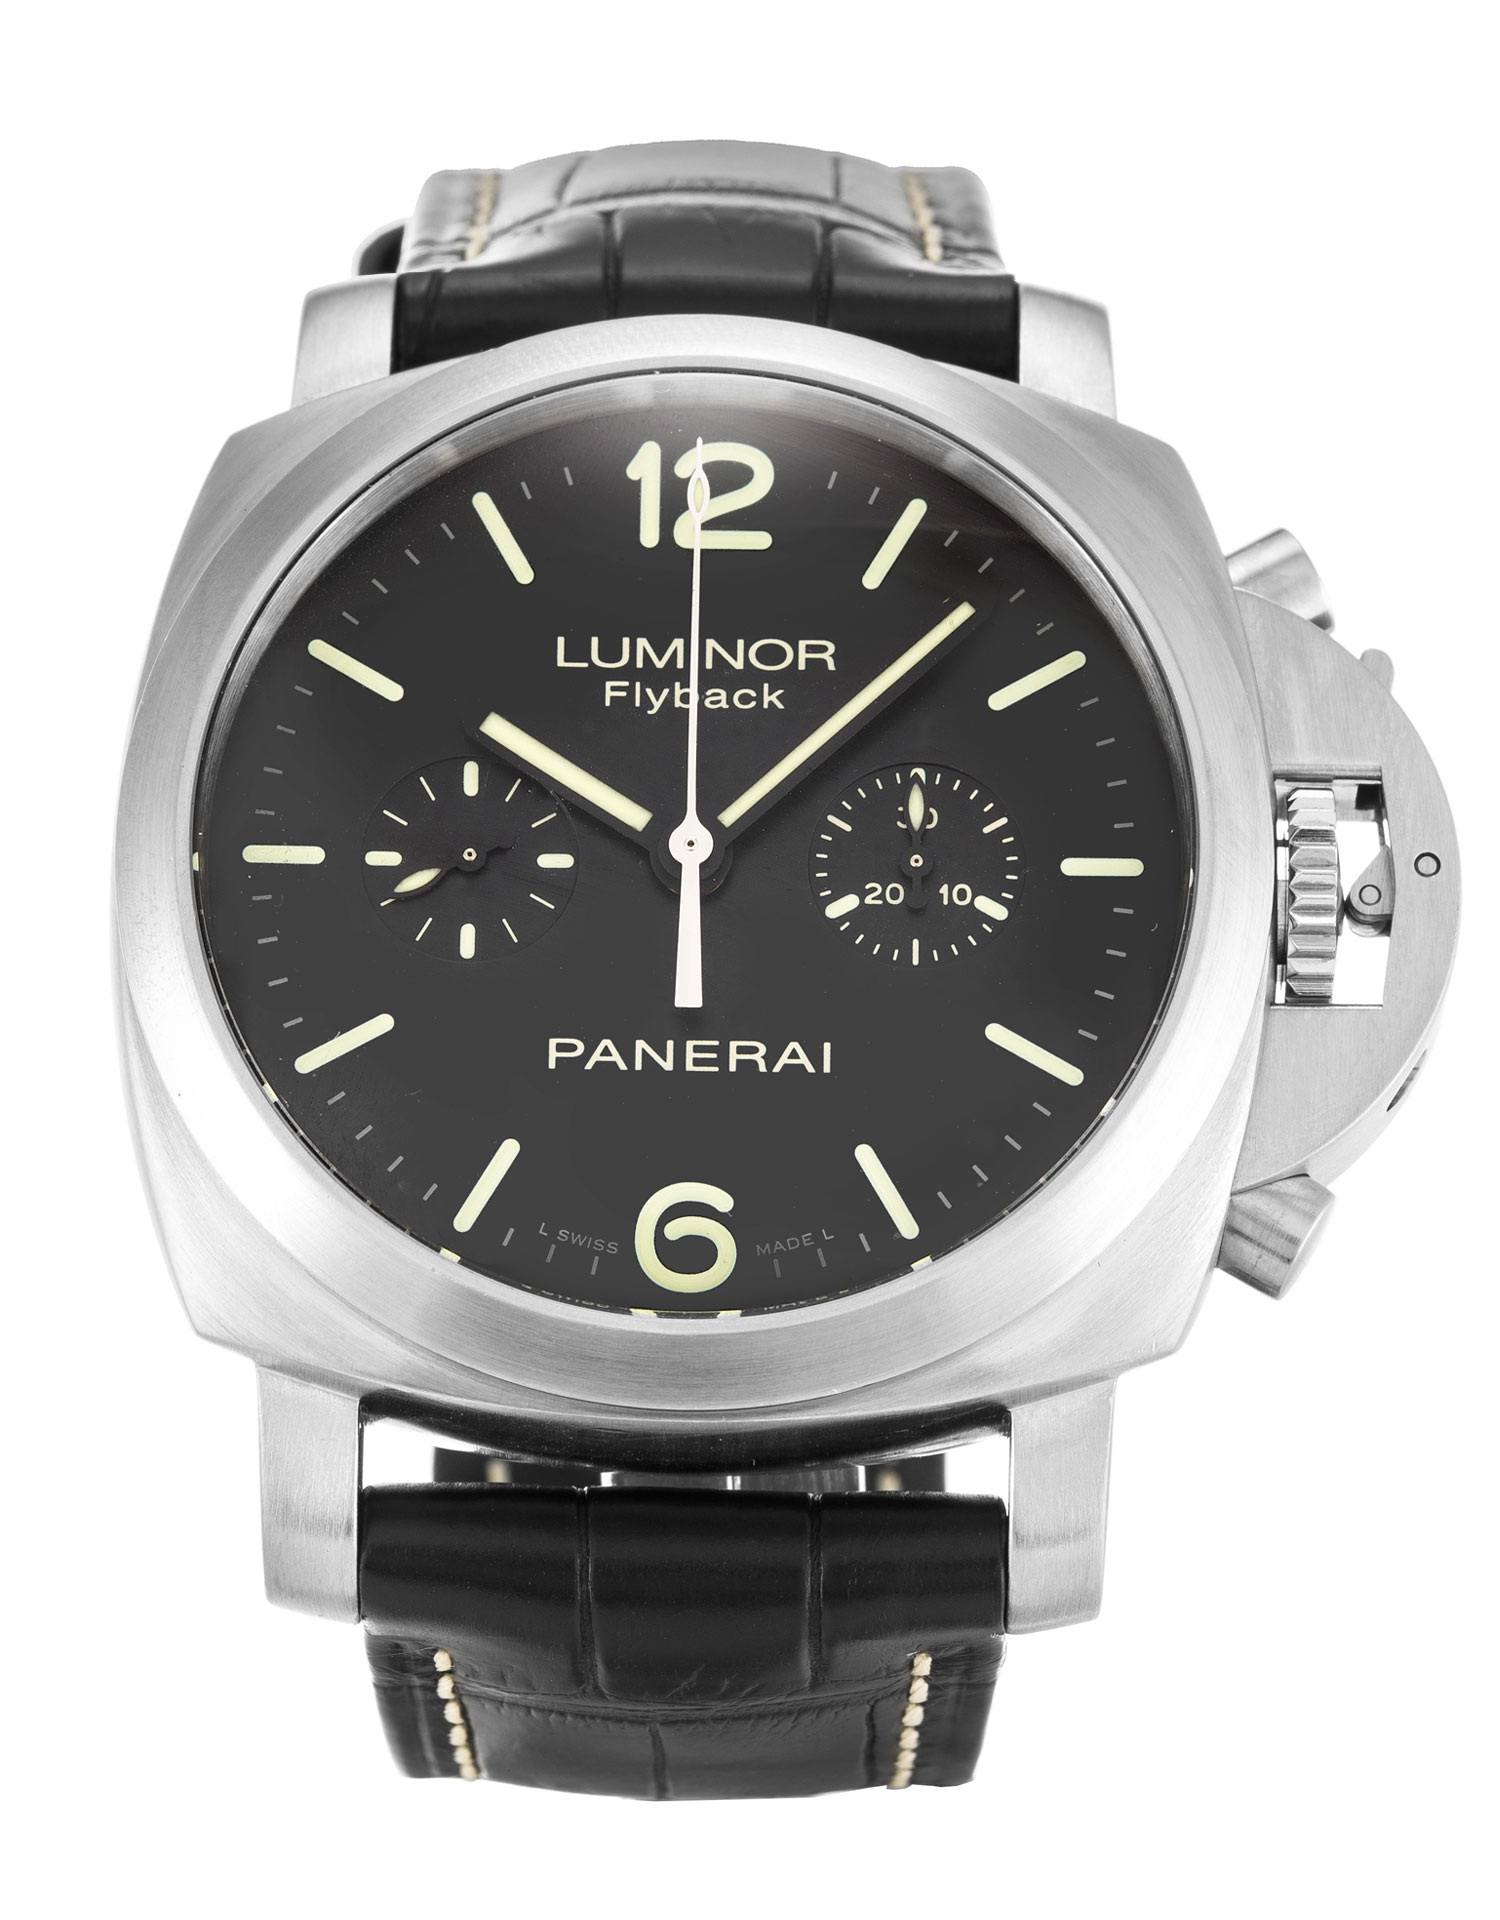 amazing replica model—panerai watch with special characteristics here (8-day power reserve movement)